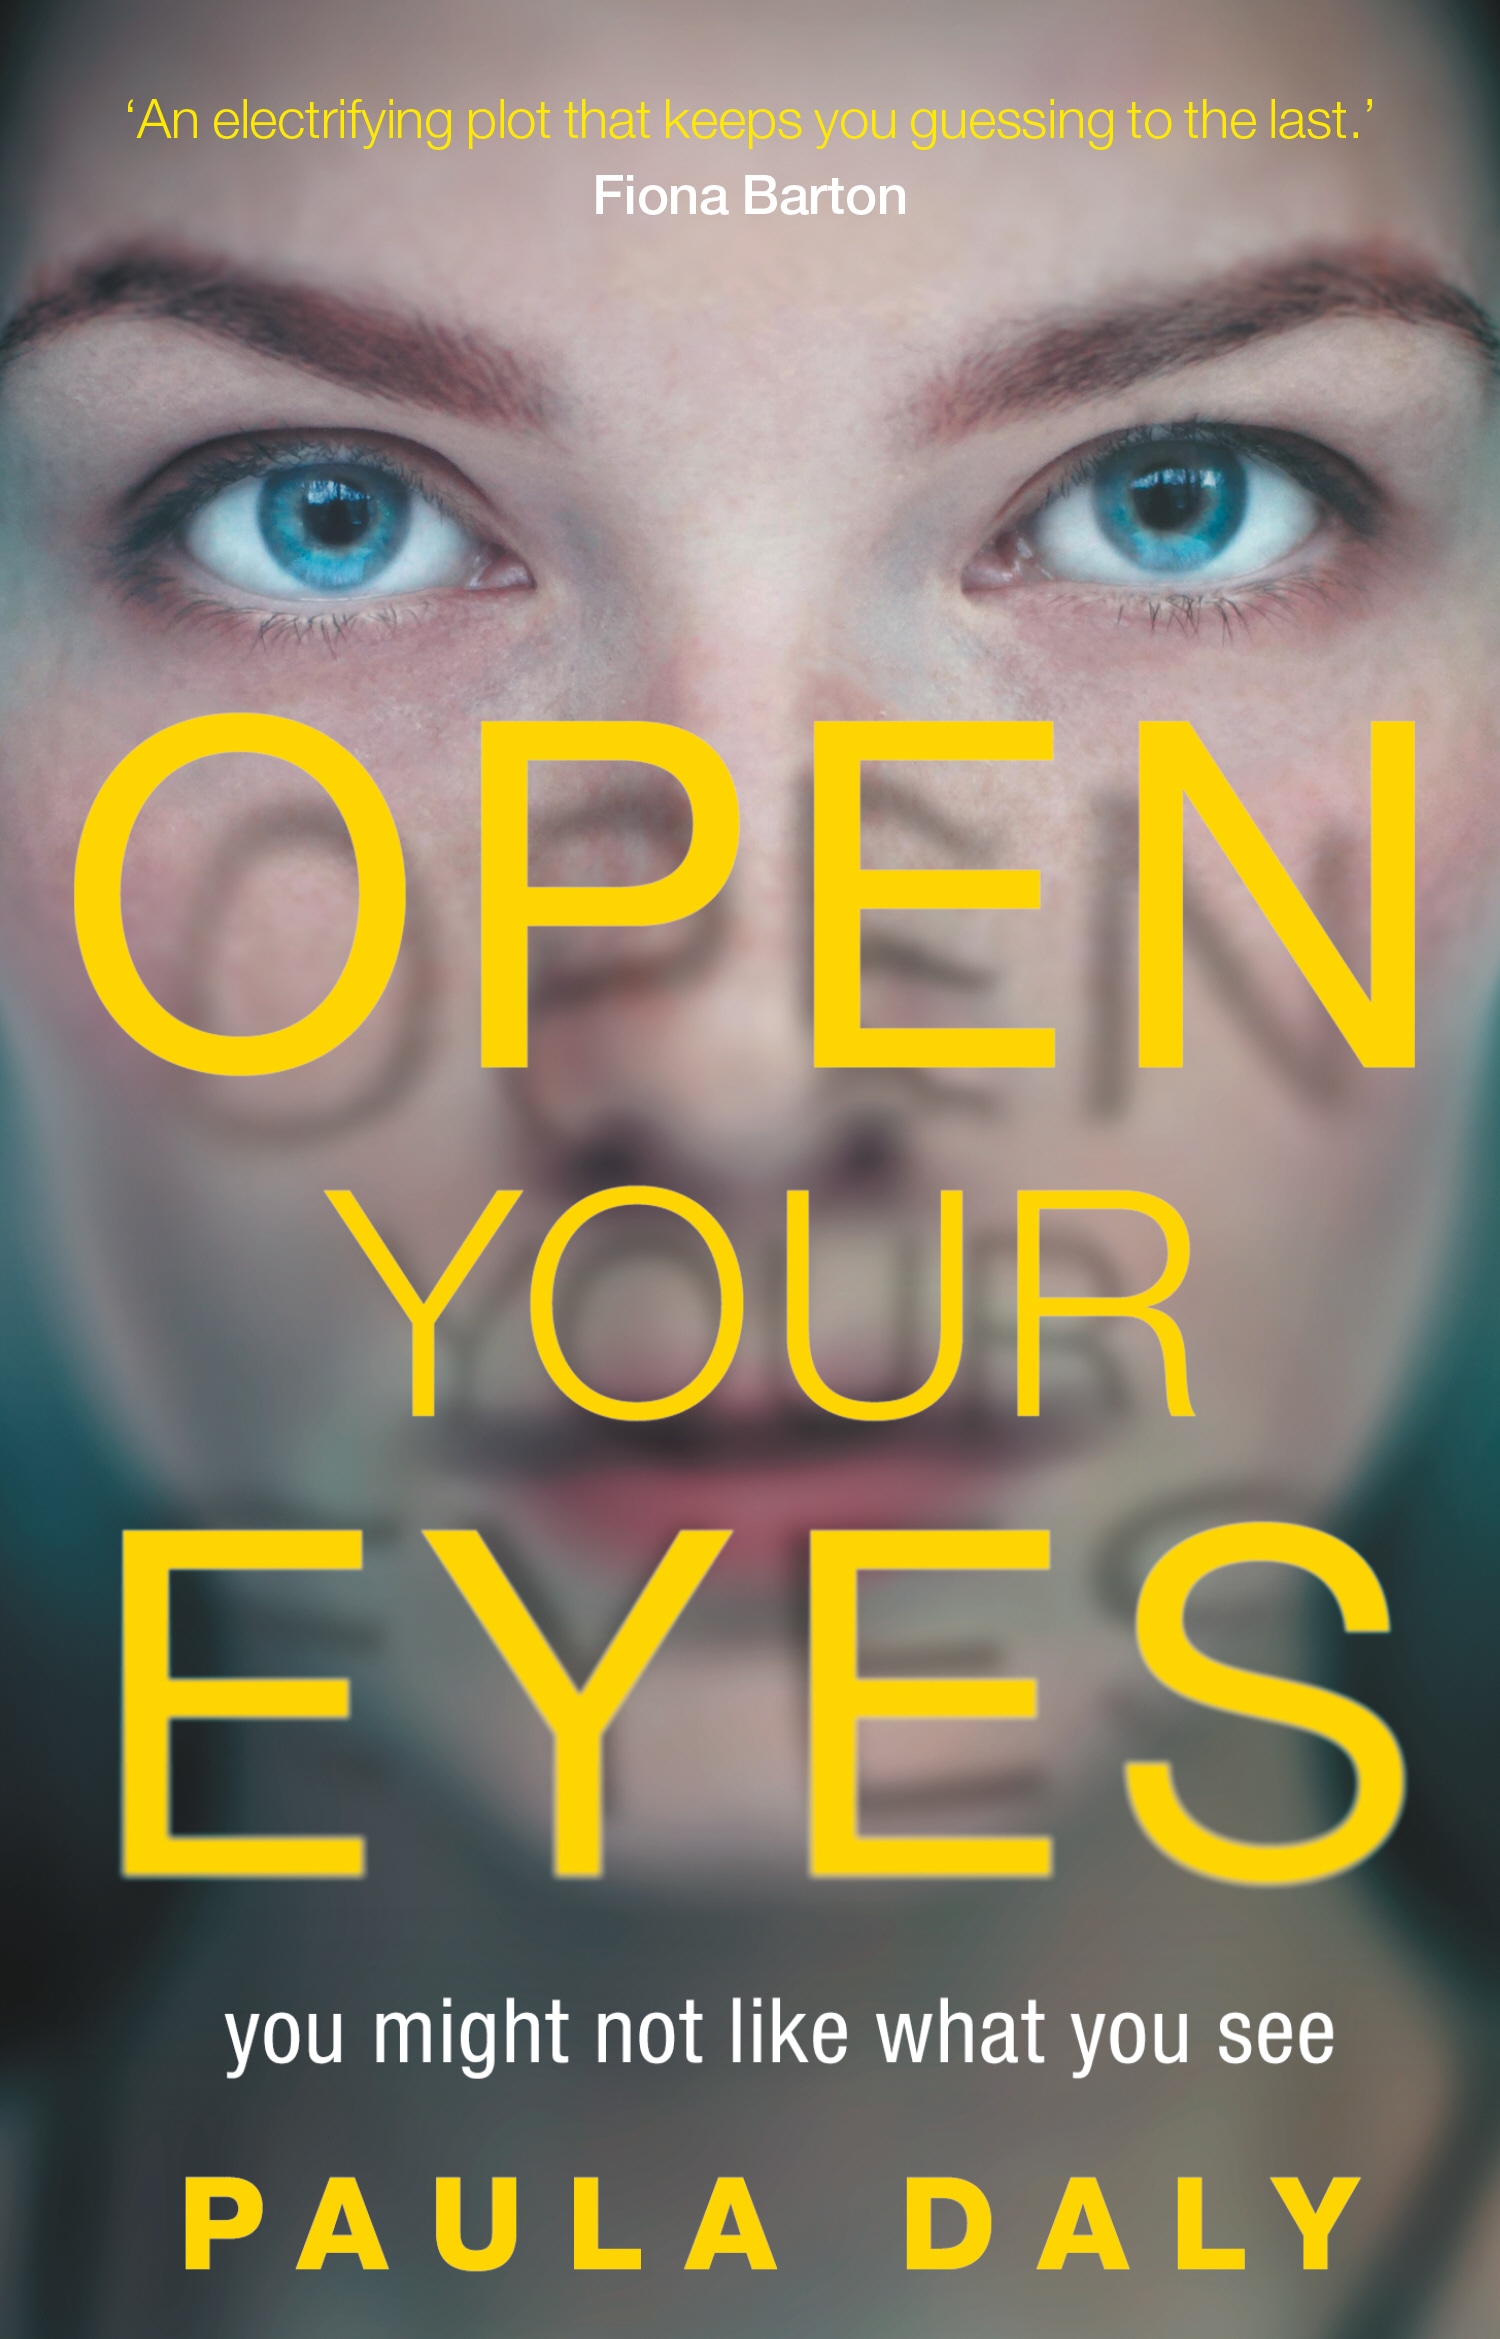 Book “Open Your Eyes” by Paula Daly — July 26, 2018